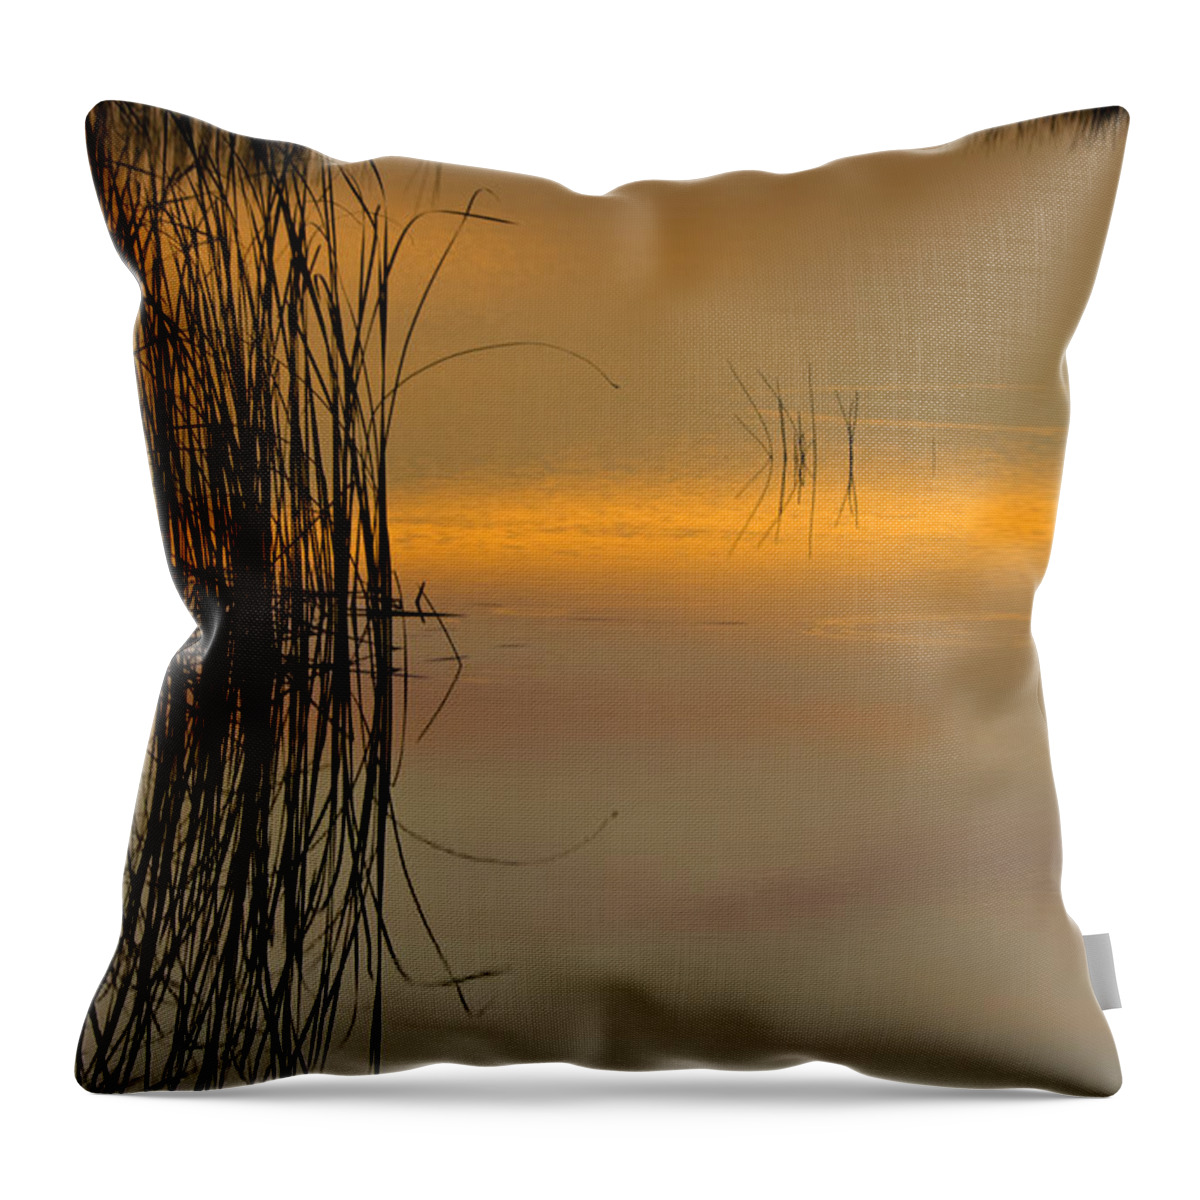 Everglades Throw Pillow featuring the photograph Everglades Grasses by Ed Gleichman